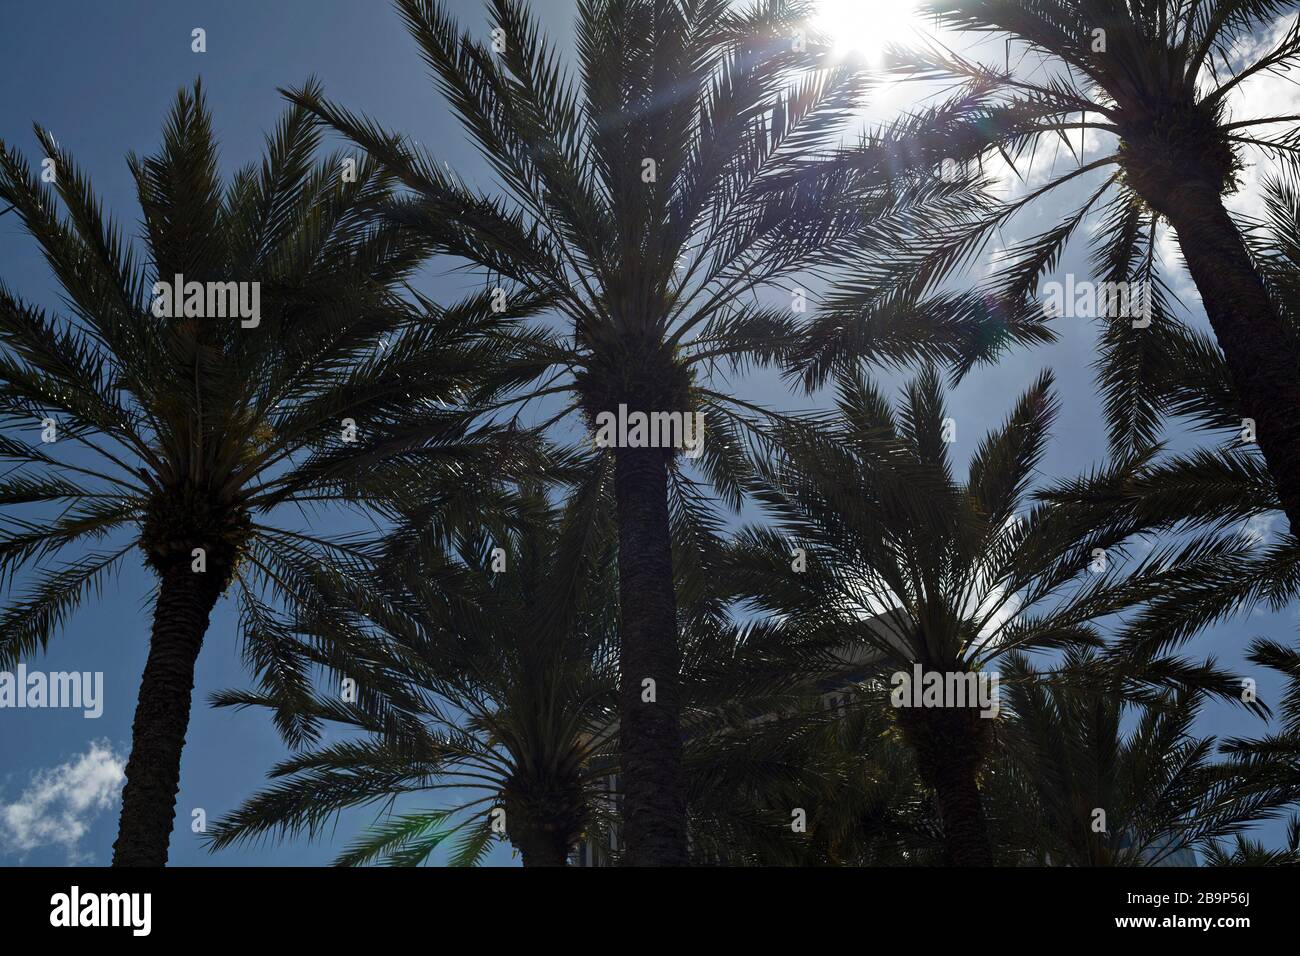 Sunlight filters through the leaves of palm trees in Tampa, Florida, USA. Stock Photo